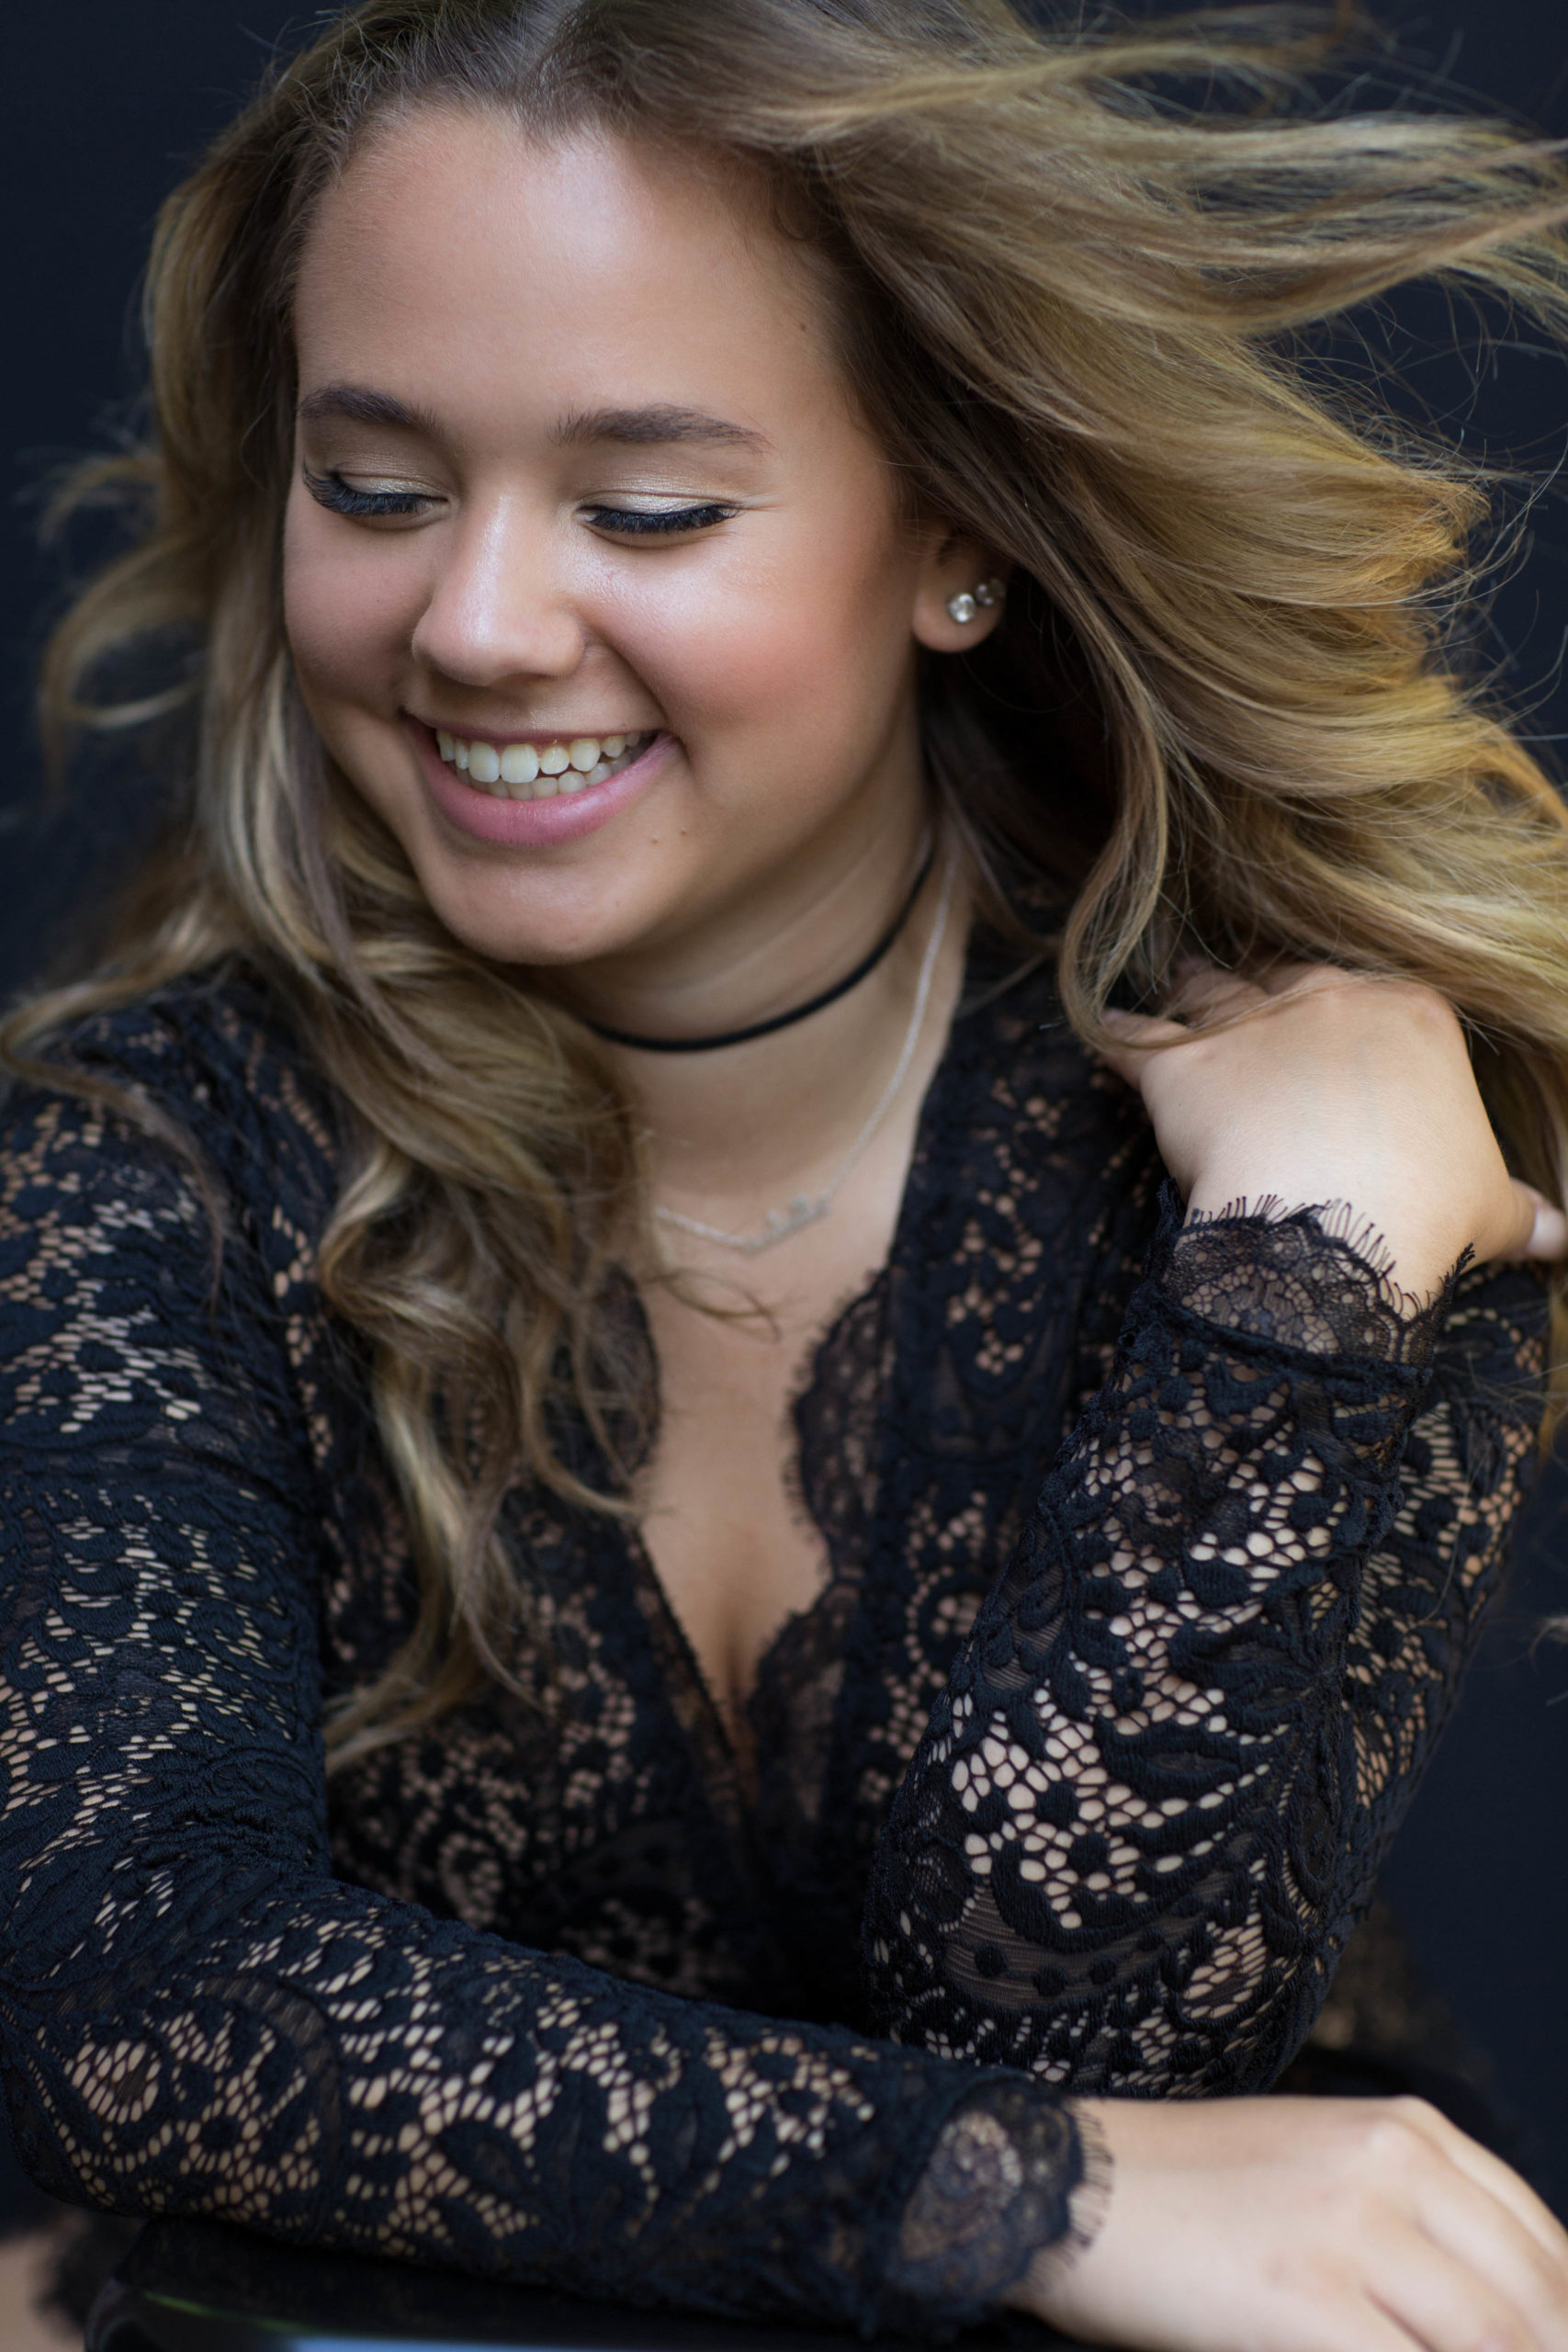 Teen portrait of girl with wind blown hair in a black lace dress